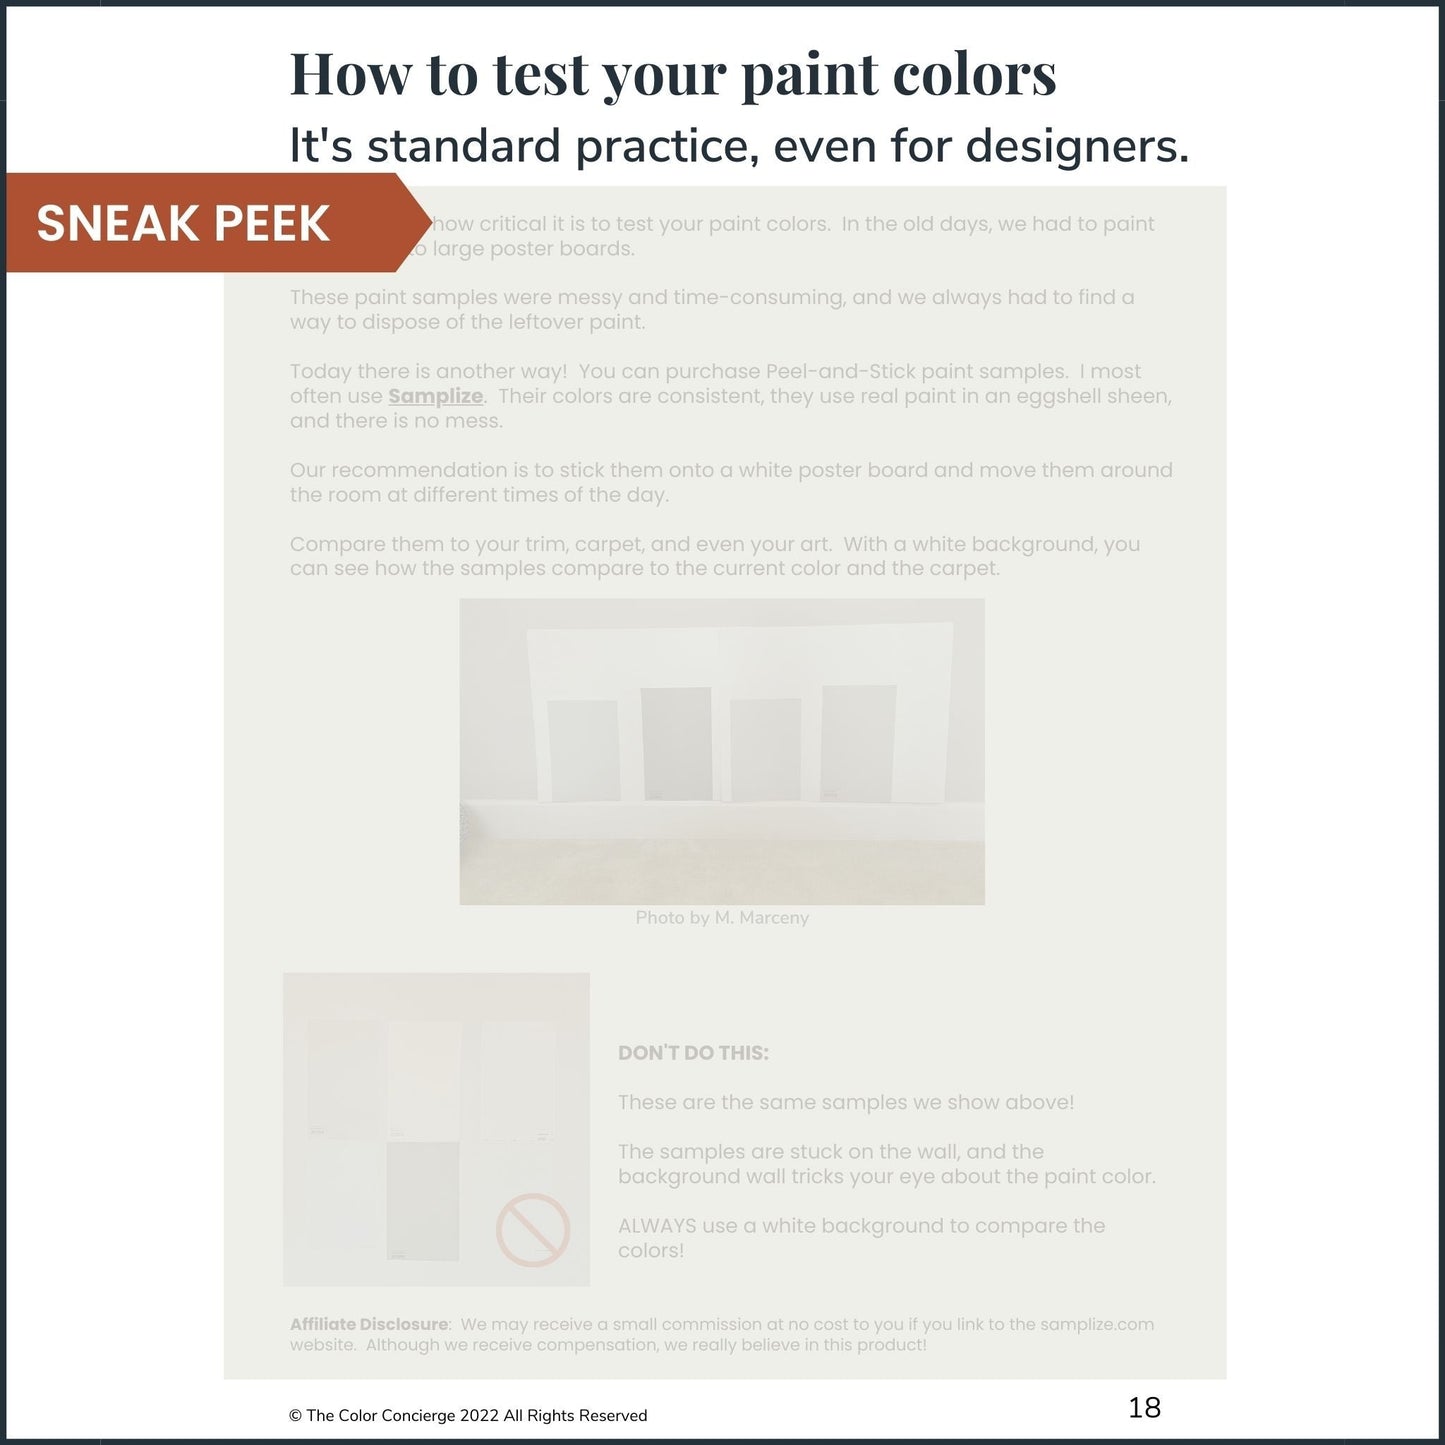 A sneek peak of a guide on how to test paint colors